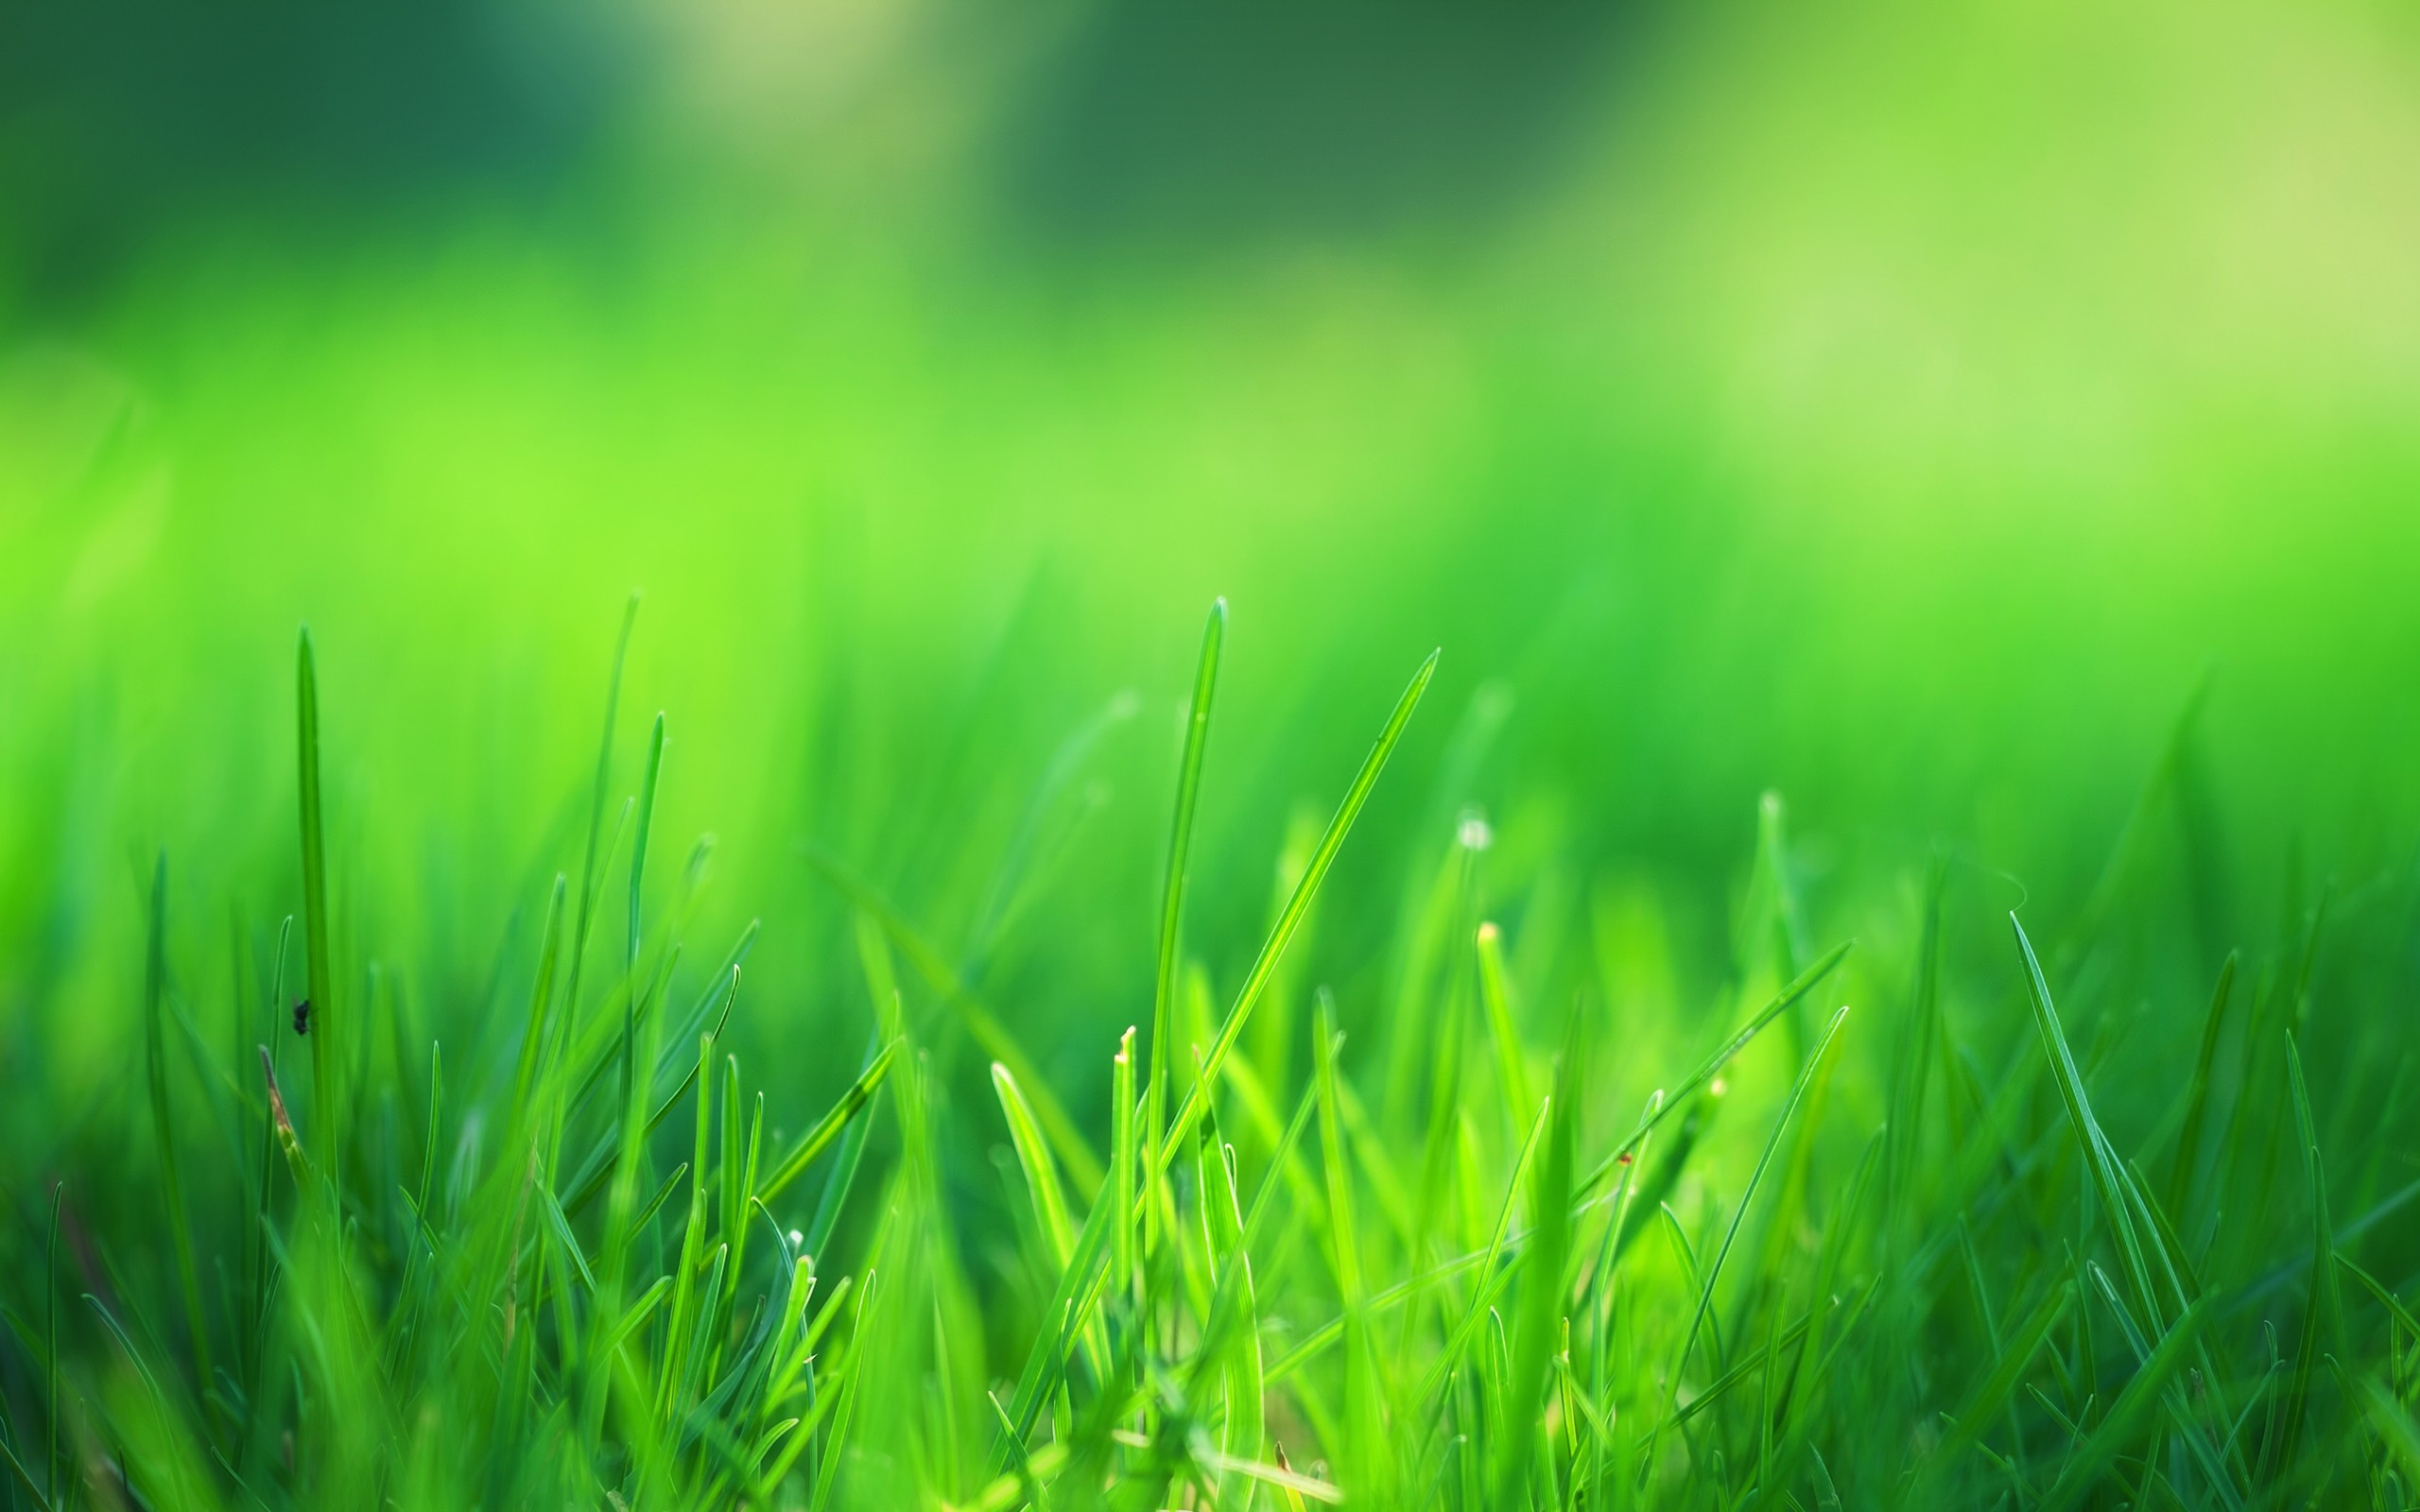 Green Grass Field, HD Nature, 4k Wallpapers, Images, Backgrounds